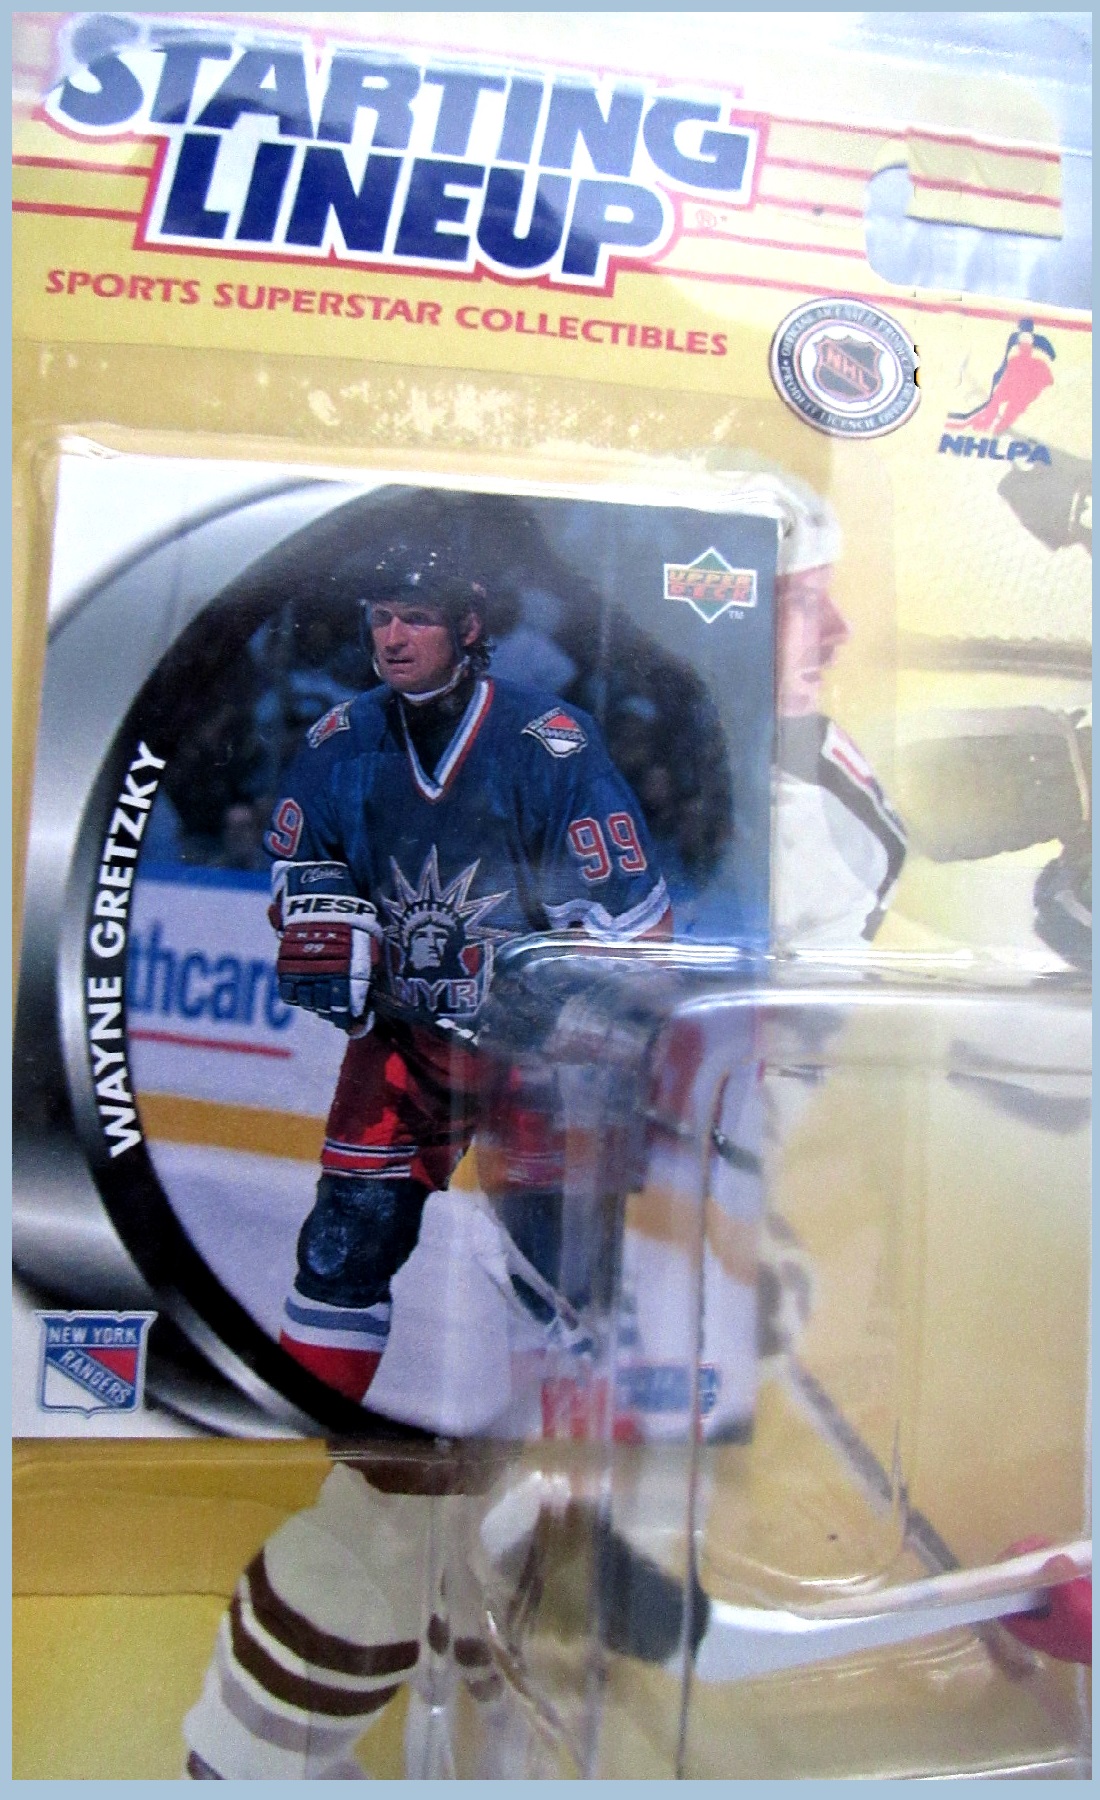 NHL Ice Hockey Star for Collectors